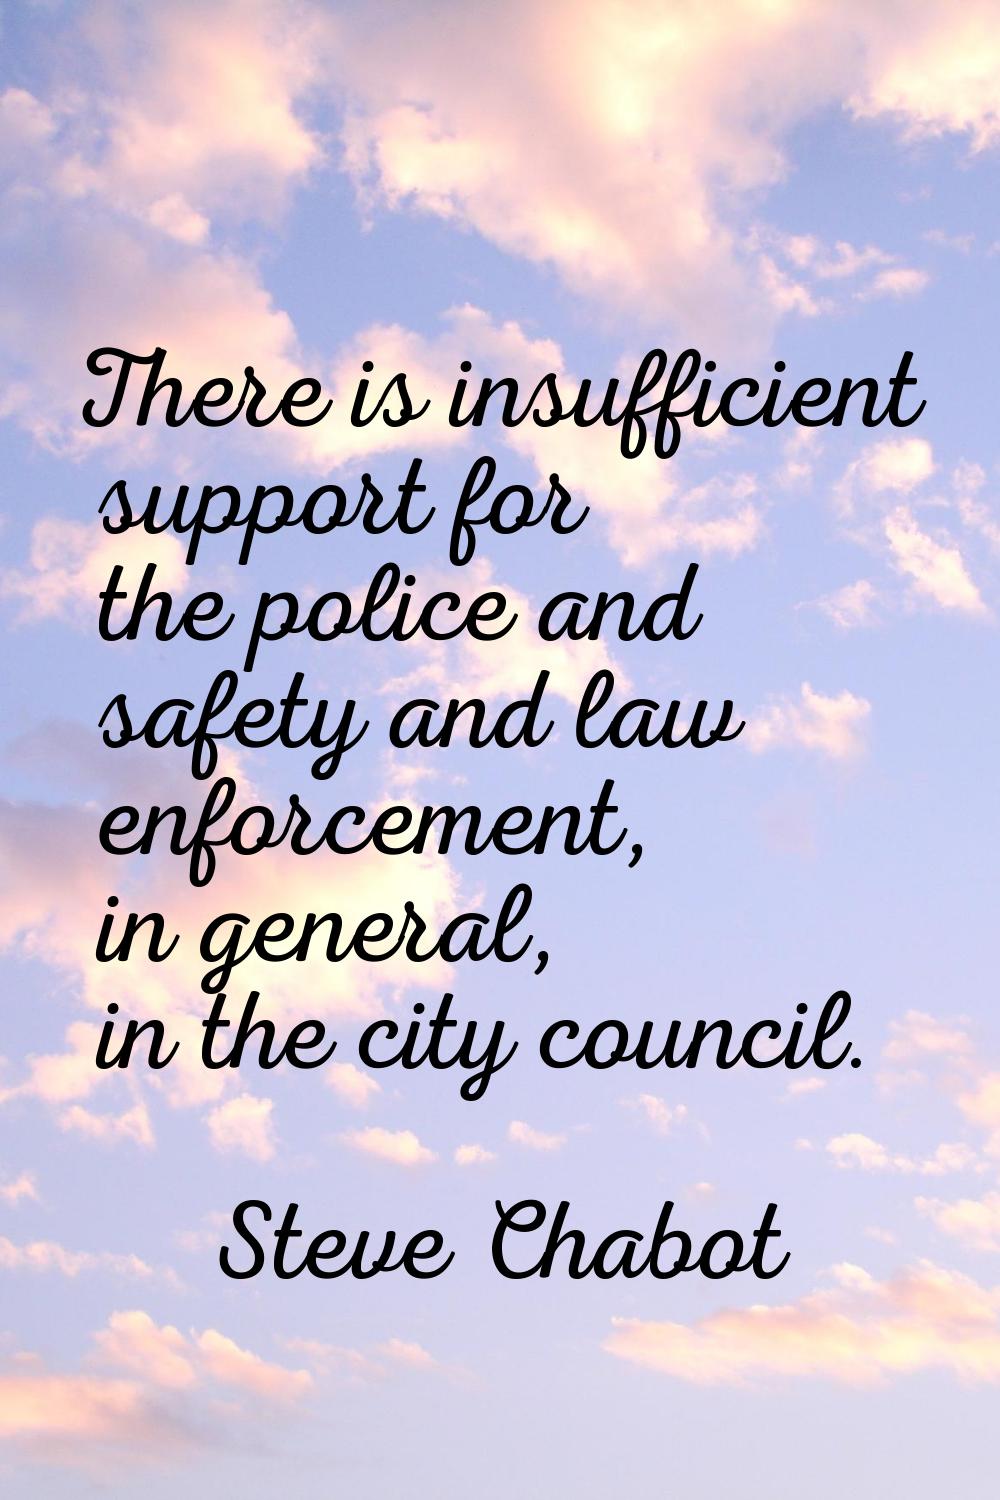 There is insufficient support for the police and safety and law enforcement, in general, in the cit